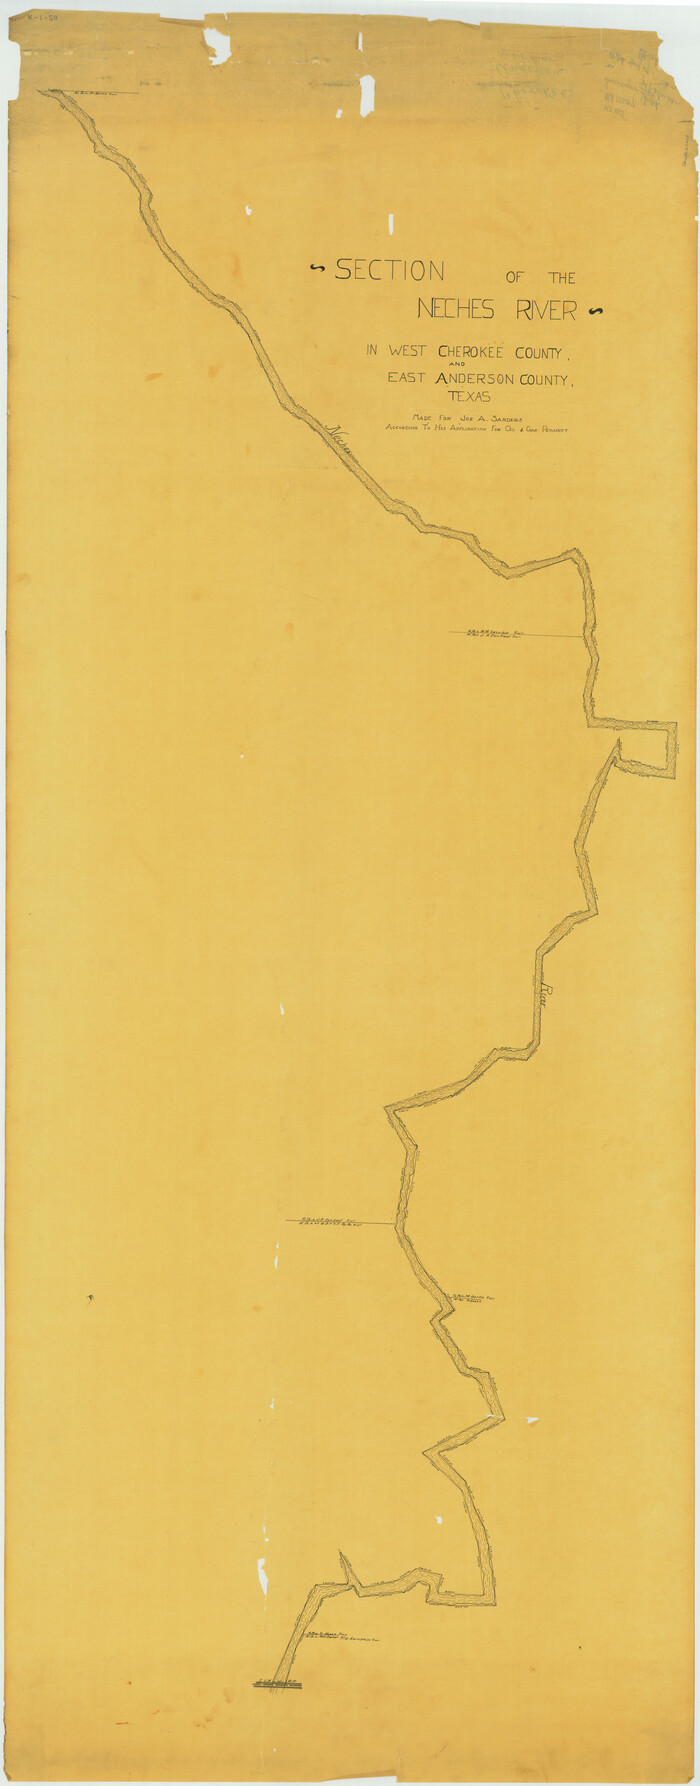 65686, [Sketch for Mineral Application 17237 / Mineral File 11855 - Neches River, Joe A. Sanders], General Map Collection